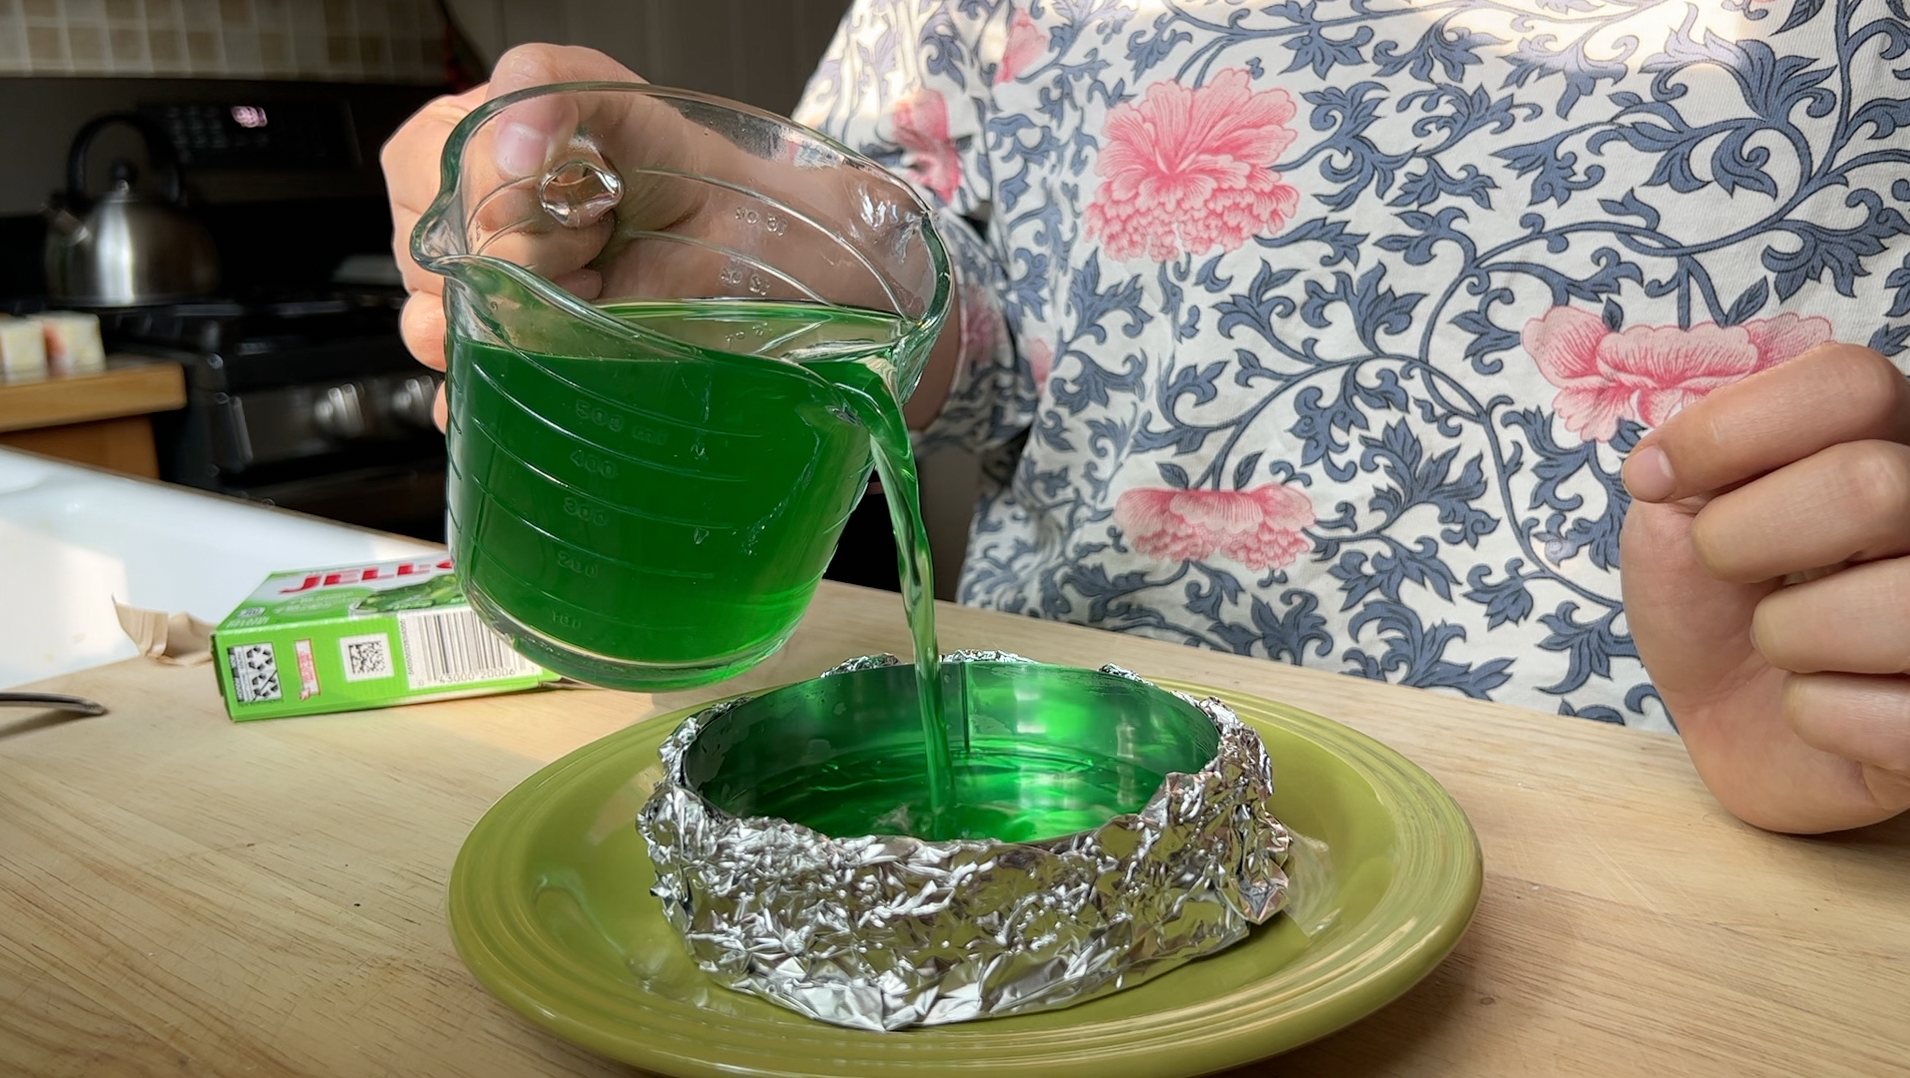 Pouring green jello into the makeshift mold.